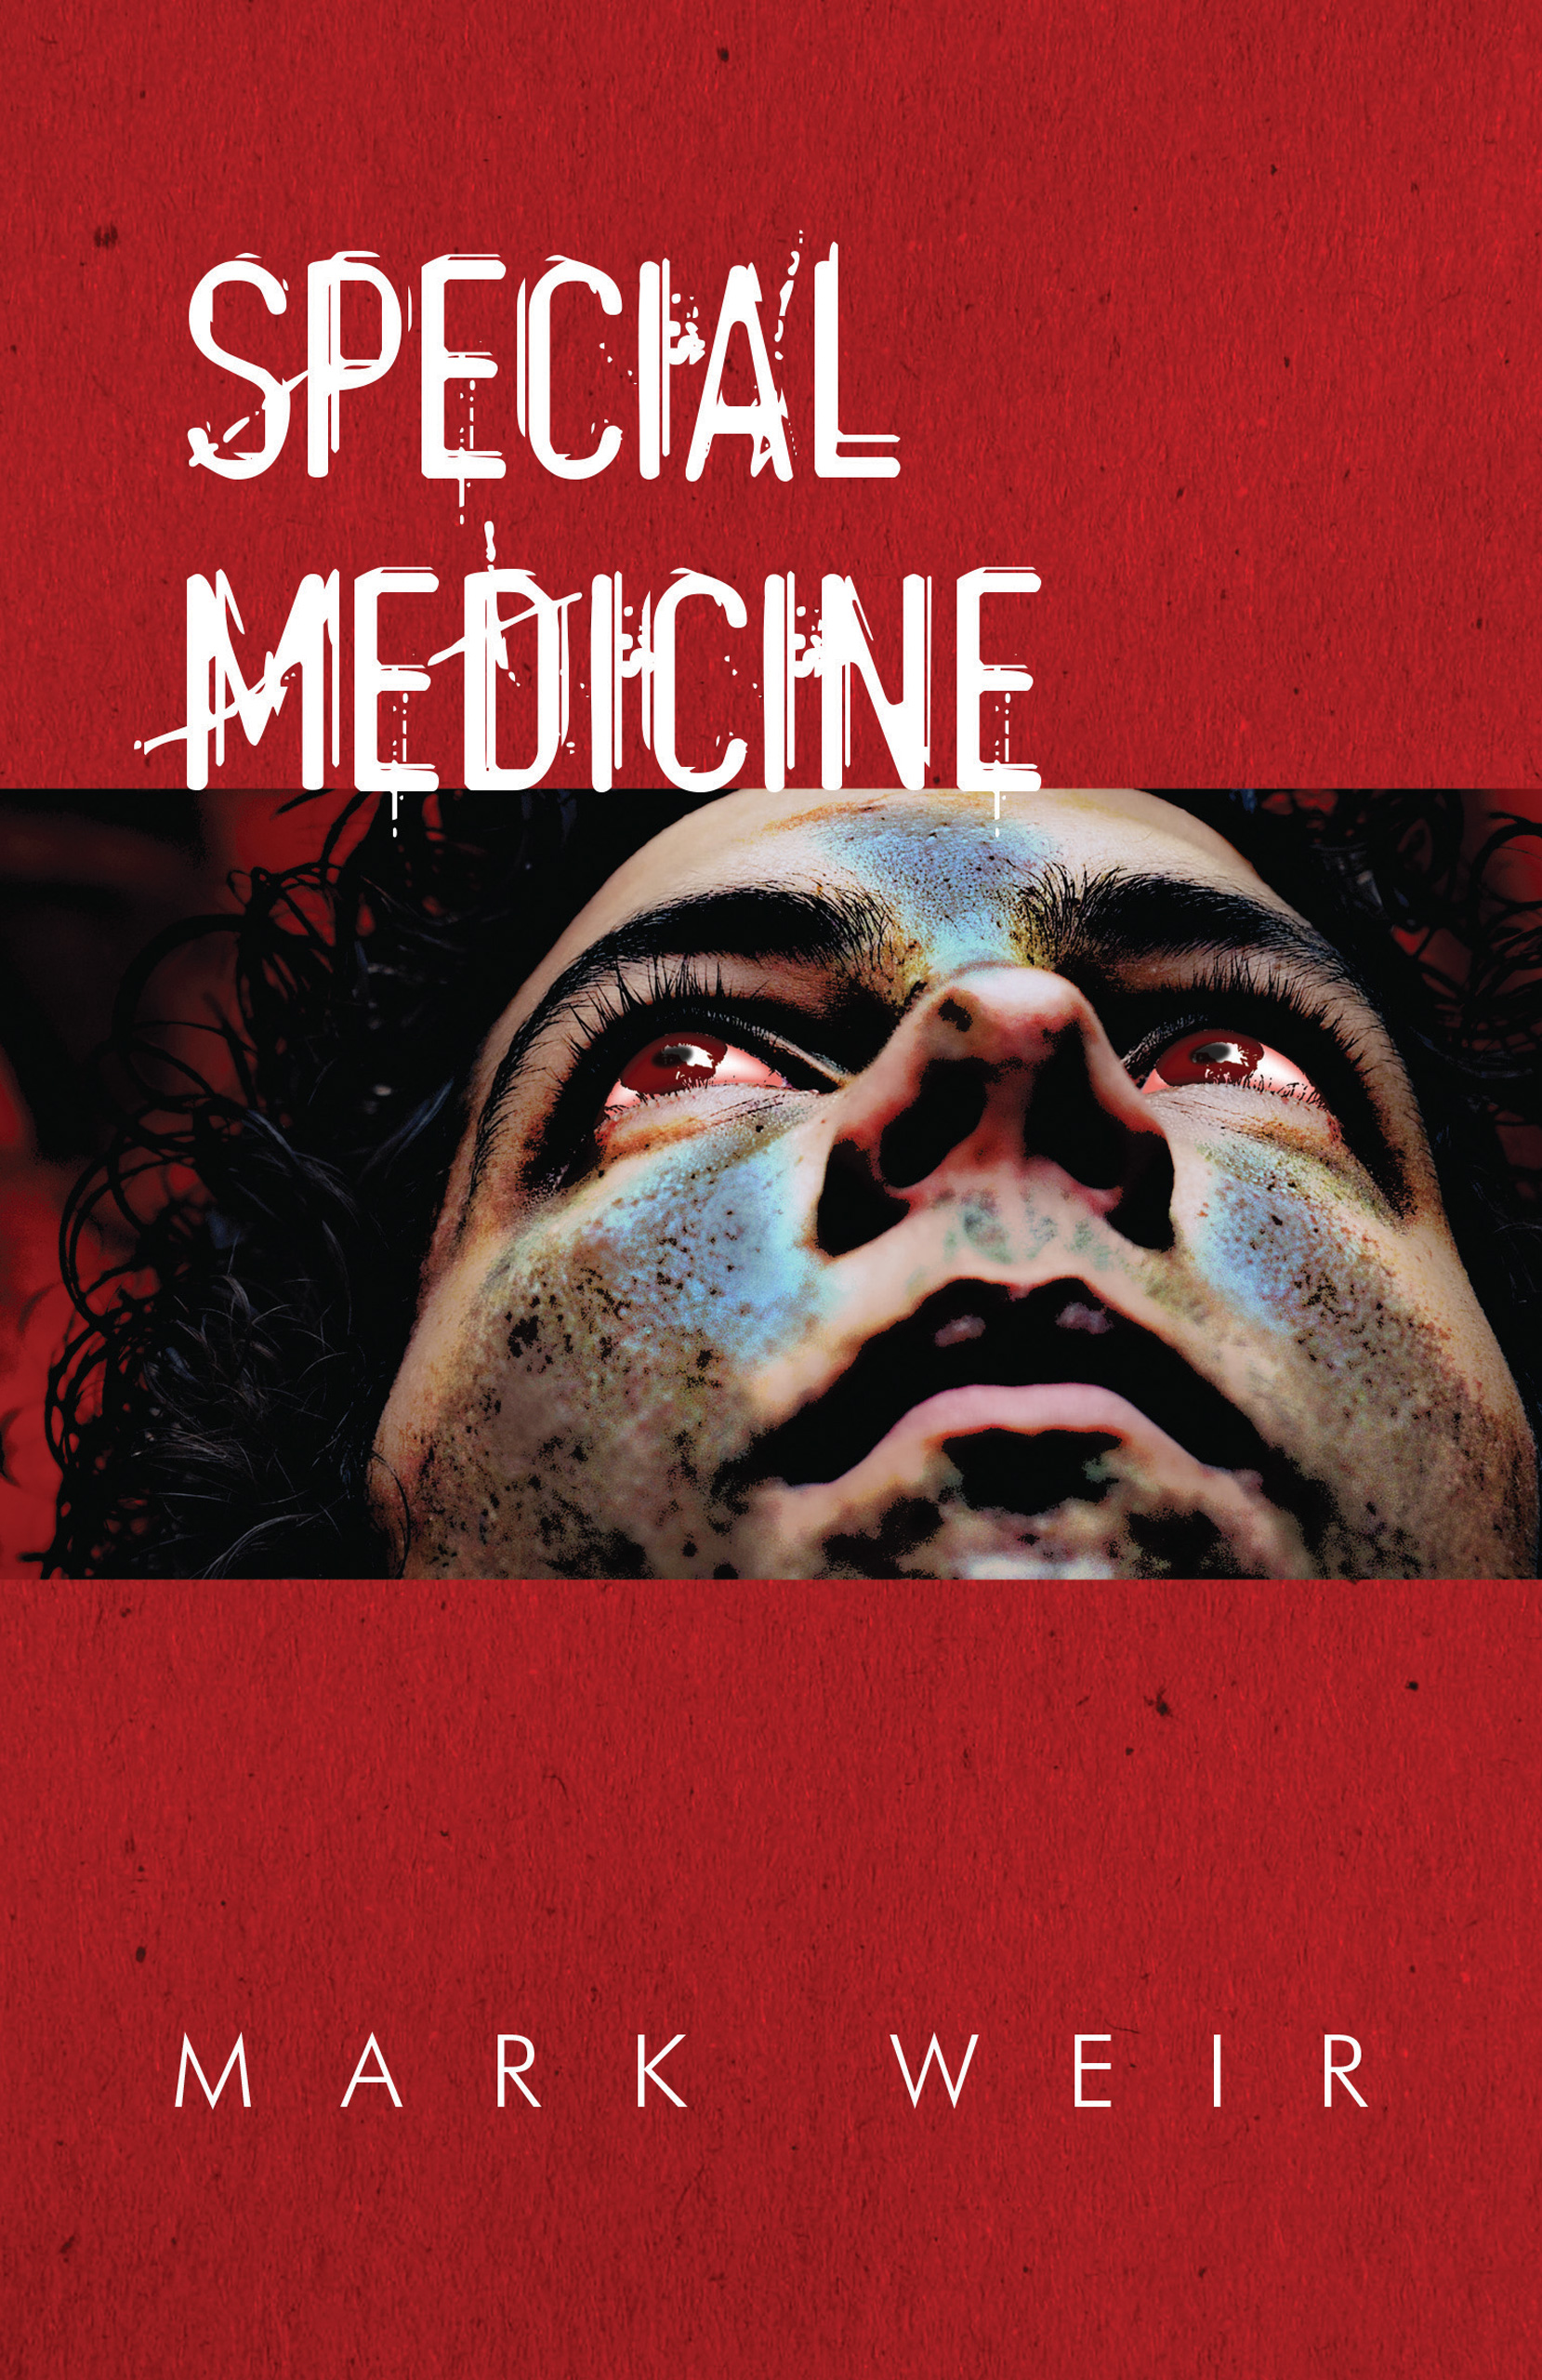 Special Medicine, by Mark Weir, front cover image.